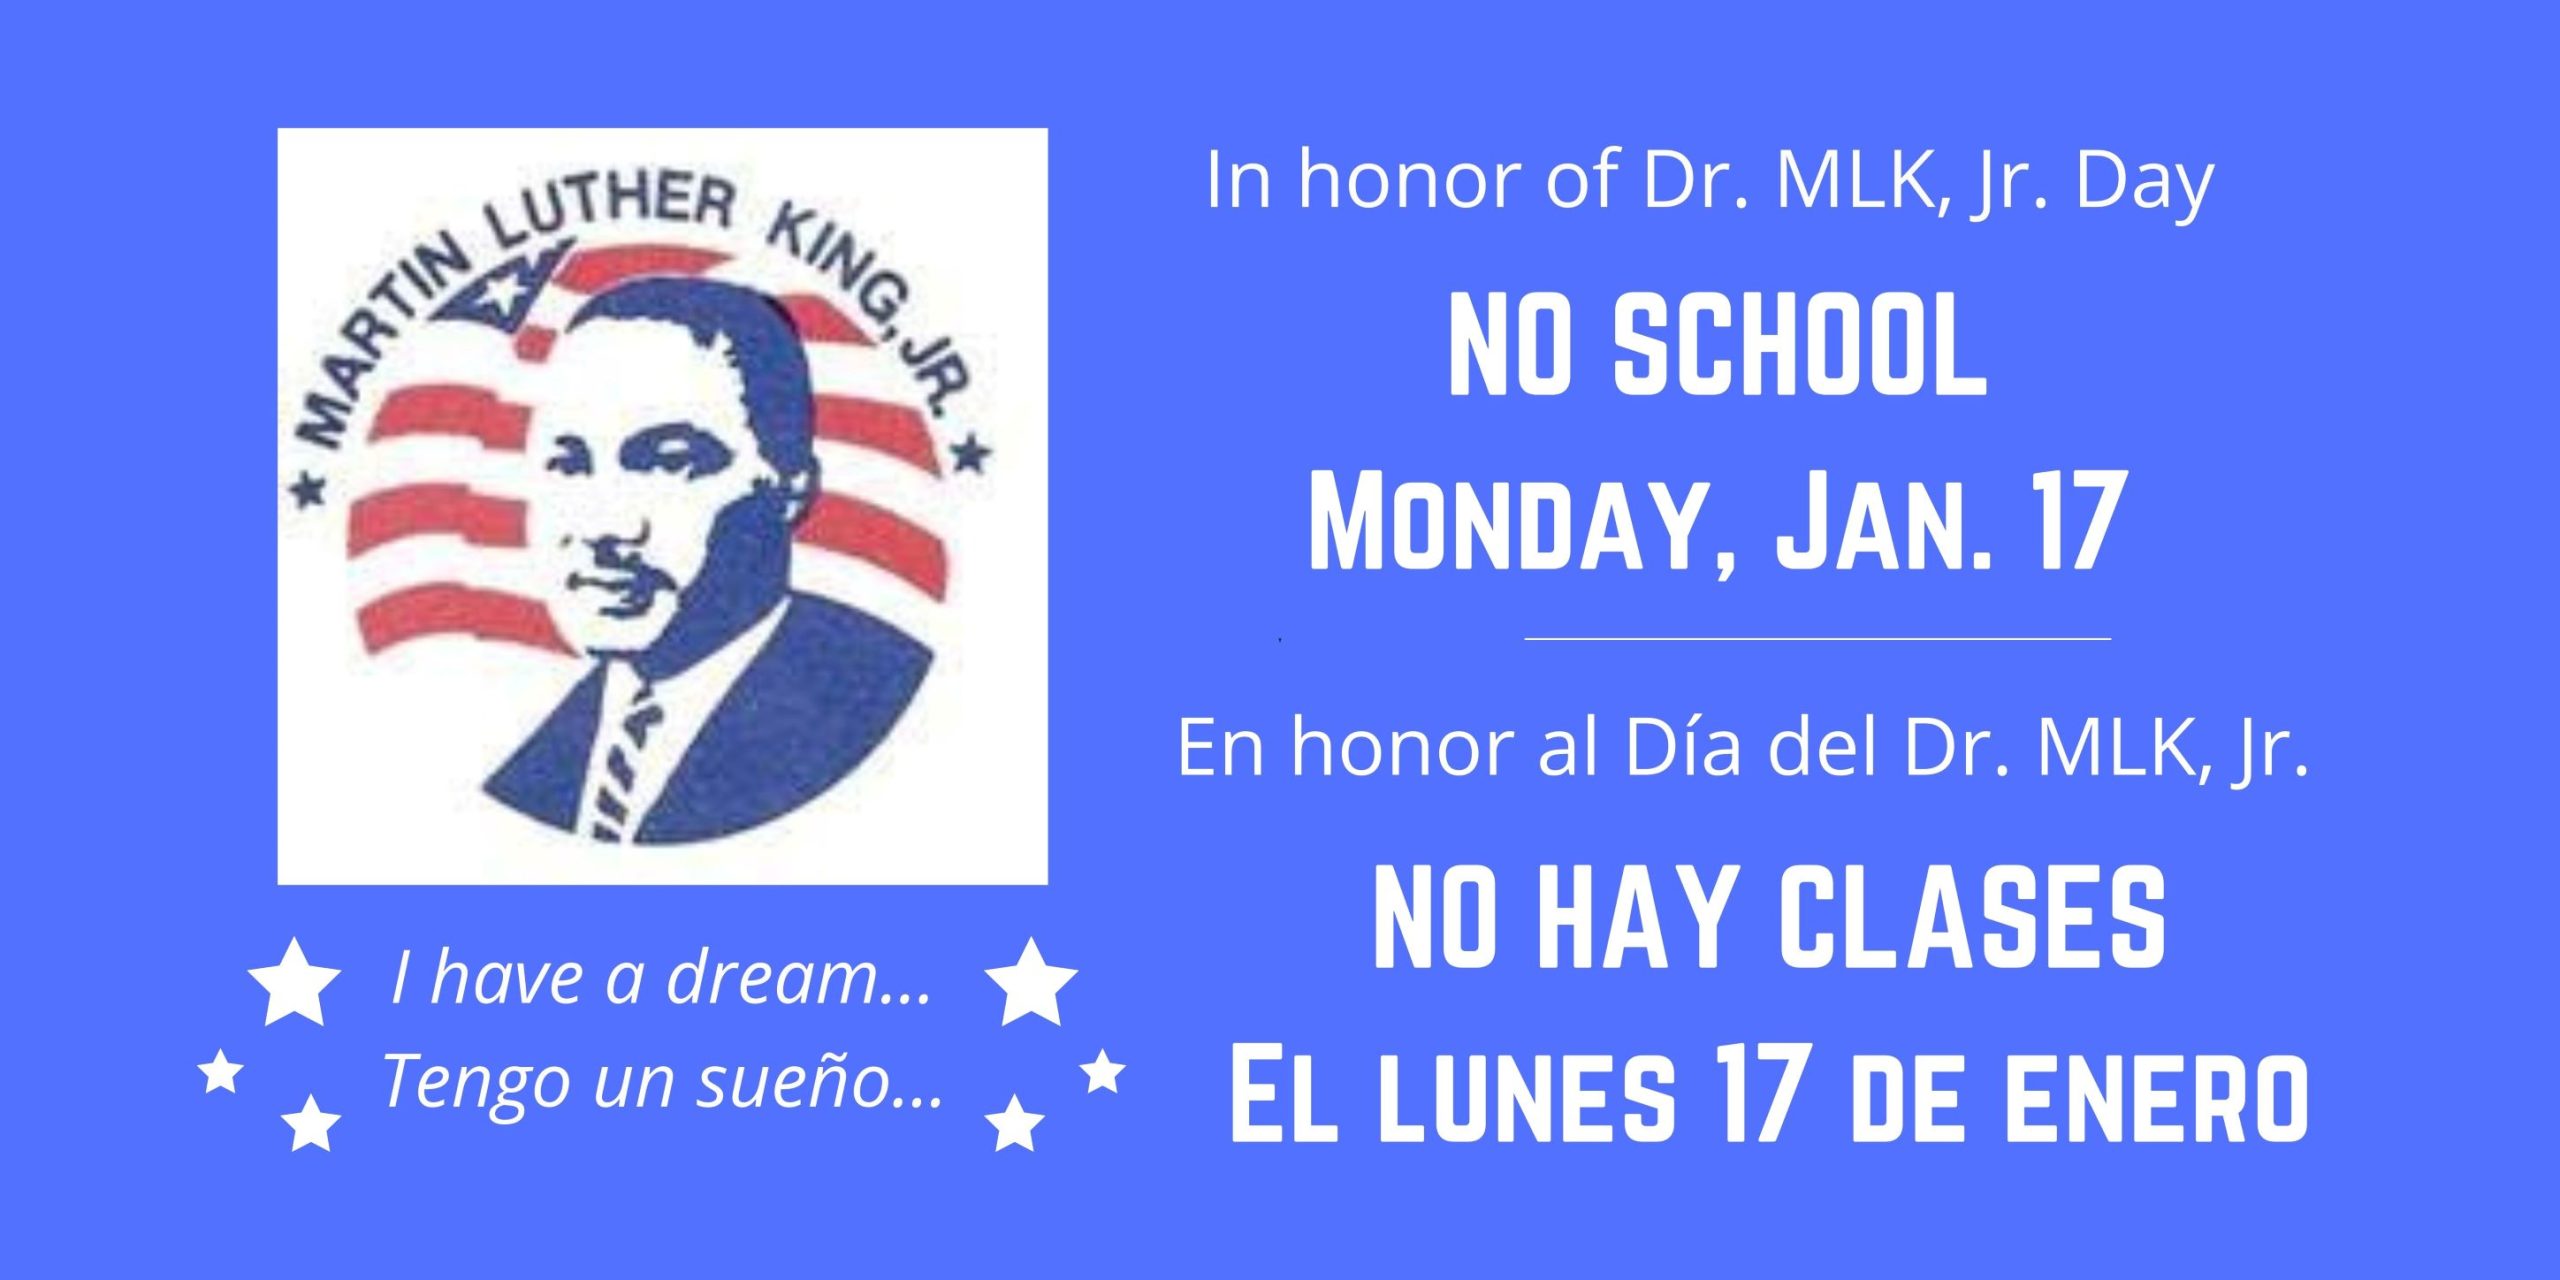 Blue banner with image of Martin Luther King, Jr. Below image are white stars and the text "I have a dream...." and "Tengo un sueño." Text on right says, "In honor of Dr. MLK, Jr: NO SCHOOL MONDAY, JAN. 17" and "En honor al día del Dr. MLK, Jr.: NO HAY CLASES EL LUNES 17 DE ENERO